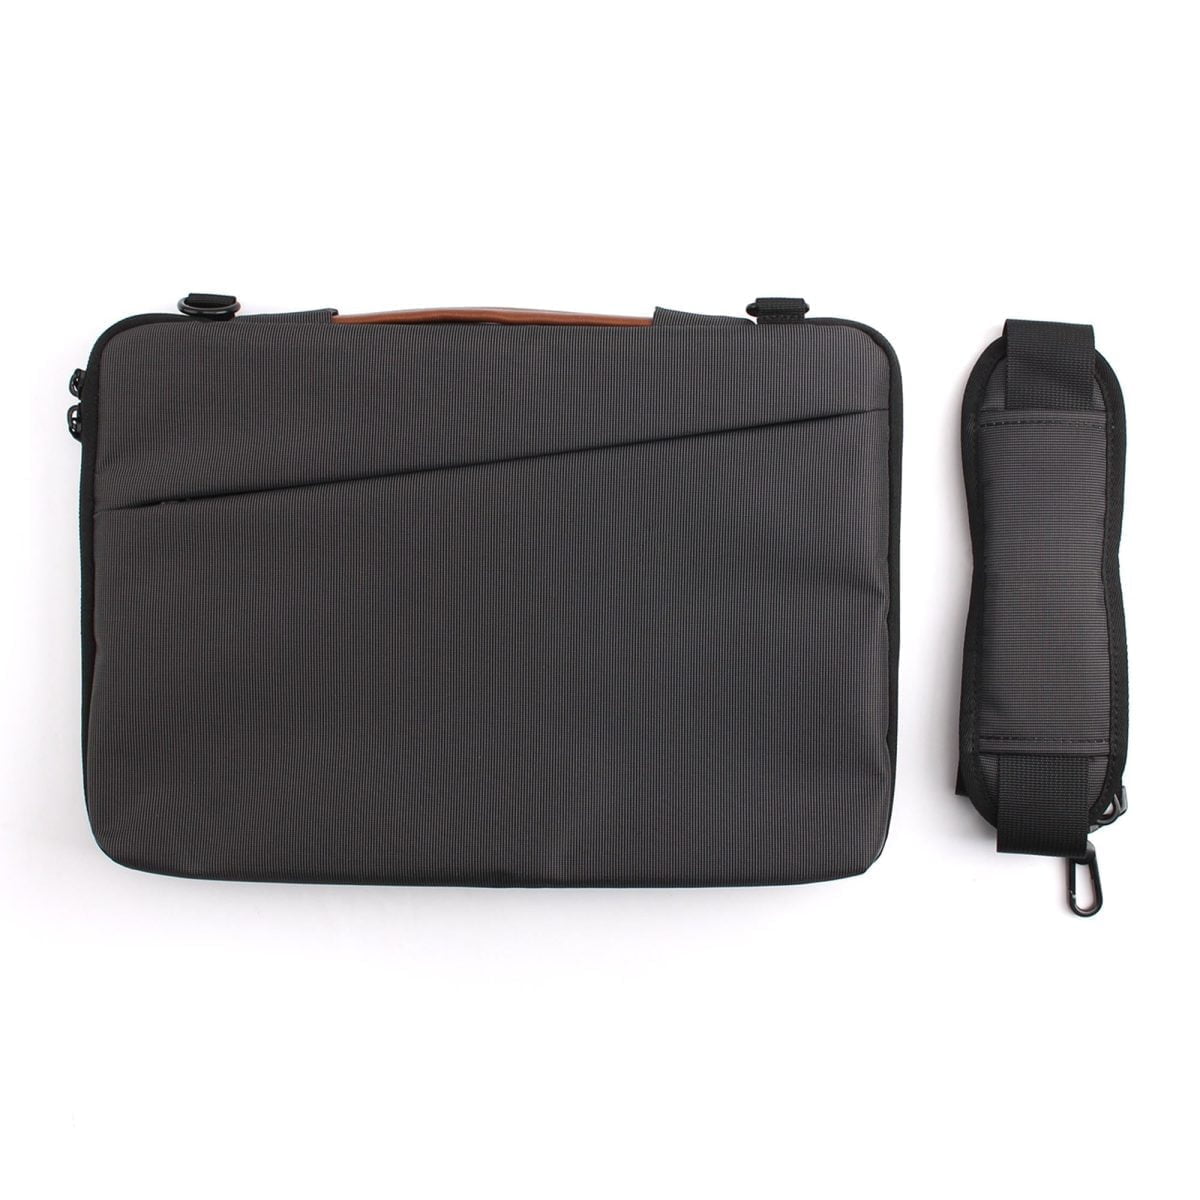 Jcp2344 Tofino Messenger Sleeve &Lt;H1 Class=&Quot;Product_Name Title&Quot;&Gt;Tofino Messenger Sleeve&Lt;/H1&Gt; &Lt;Div Class=&Quot;Description Content Has-Padding-Top&Quot;&Gt; The Transformative Tofino Messenger Sleeve Can Be Used As A Shoulder Bag Or Carry Sleeve Making It A Versatile Carry Solution. Featuring An Easy Access Outer Pocket As Well As Internal Pockets For Accessories, A Water-Resistant Outer Shell And A Removable Shoulder Strap, The Tofino Is The Ideal Travel Companion. &Lt;Ul&Gt; &Lt;Li&Gt;Large Accessories Pockets&Lt;/Li&Gt; &Lt;Li&Gt;Soft Padded Bumper&Lt;/Li&Gt; &Lt;Li&Gt;Removable Shoulder Strap&Lt;/Li&Gt; &Lt;Li&Gt;Retractable Carry Handle&Lt;/Li&Gt; &Lt;Li&Gt;Water Resistant Outer&Lt;/Li&Gt; &Lt;Li&Gt;Compatible With 13.5&Quot; Devices&Lt;/Li&Gt; &Lt;/Ul&Gt; &Lt;Strong&Gt;Microsoft Dfs Certified Compatible With:&Lt;/Strong&Gt; &Lt;Ul&Gt; &Lt;Li&Gt;Surface Pro 4, 5, 6, 7, X&Lt;/Li&Gt; &Lt;Li&Gt;Surface Pro 5 With Lte Advanced&Lt;/Li&Gt; &Lt;Li&Gt;Surface Laptop Go&Lt;/Li&Gt; &Lt;Li&Gt;Surface Laptop 1, 2, 3 13.5&Quot;&Lt;/Li&Gt; &Lt;/Ul&Gt; Also Compatible With Devices Up To 310X220X15Mm Such As: &Lt;Ul&Gt; &Lt;Li&Gt;Macbook Pro 13&Quot; - Usb-C/Touch Bar Models&Lt;/Li&Gt; &Lt;Li&Gt;Macbook Air - Usb-C Models&Lt;/Li&Gt; &Lt;Li&Gt;Macbook 12&Quot;&Lt;/Li&Gt; &Lt;/Ul&Gt; &Lt;/Div&Gt; Tofino Messenger Sleeve Tofino Messenger Sleeve -13&Quot; Black Jcpal - Jcp2344